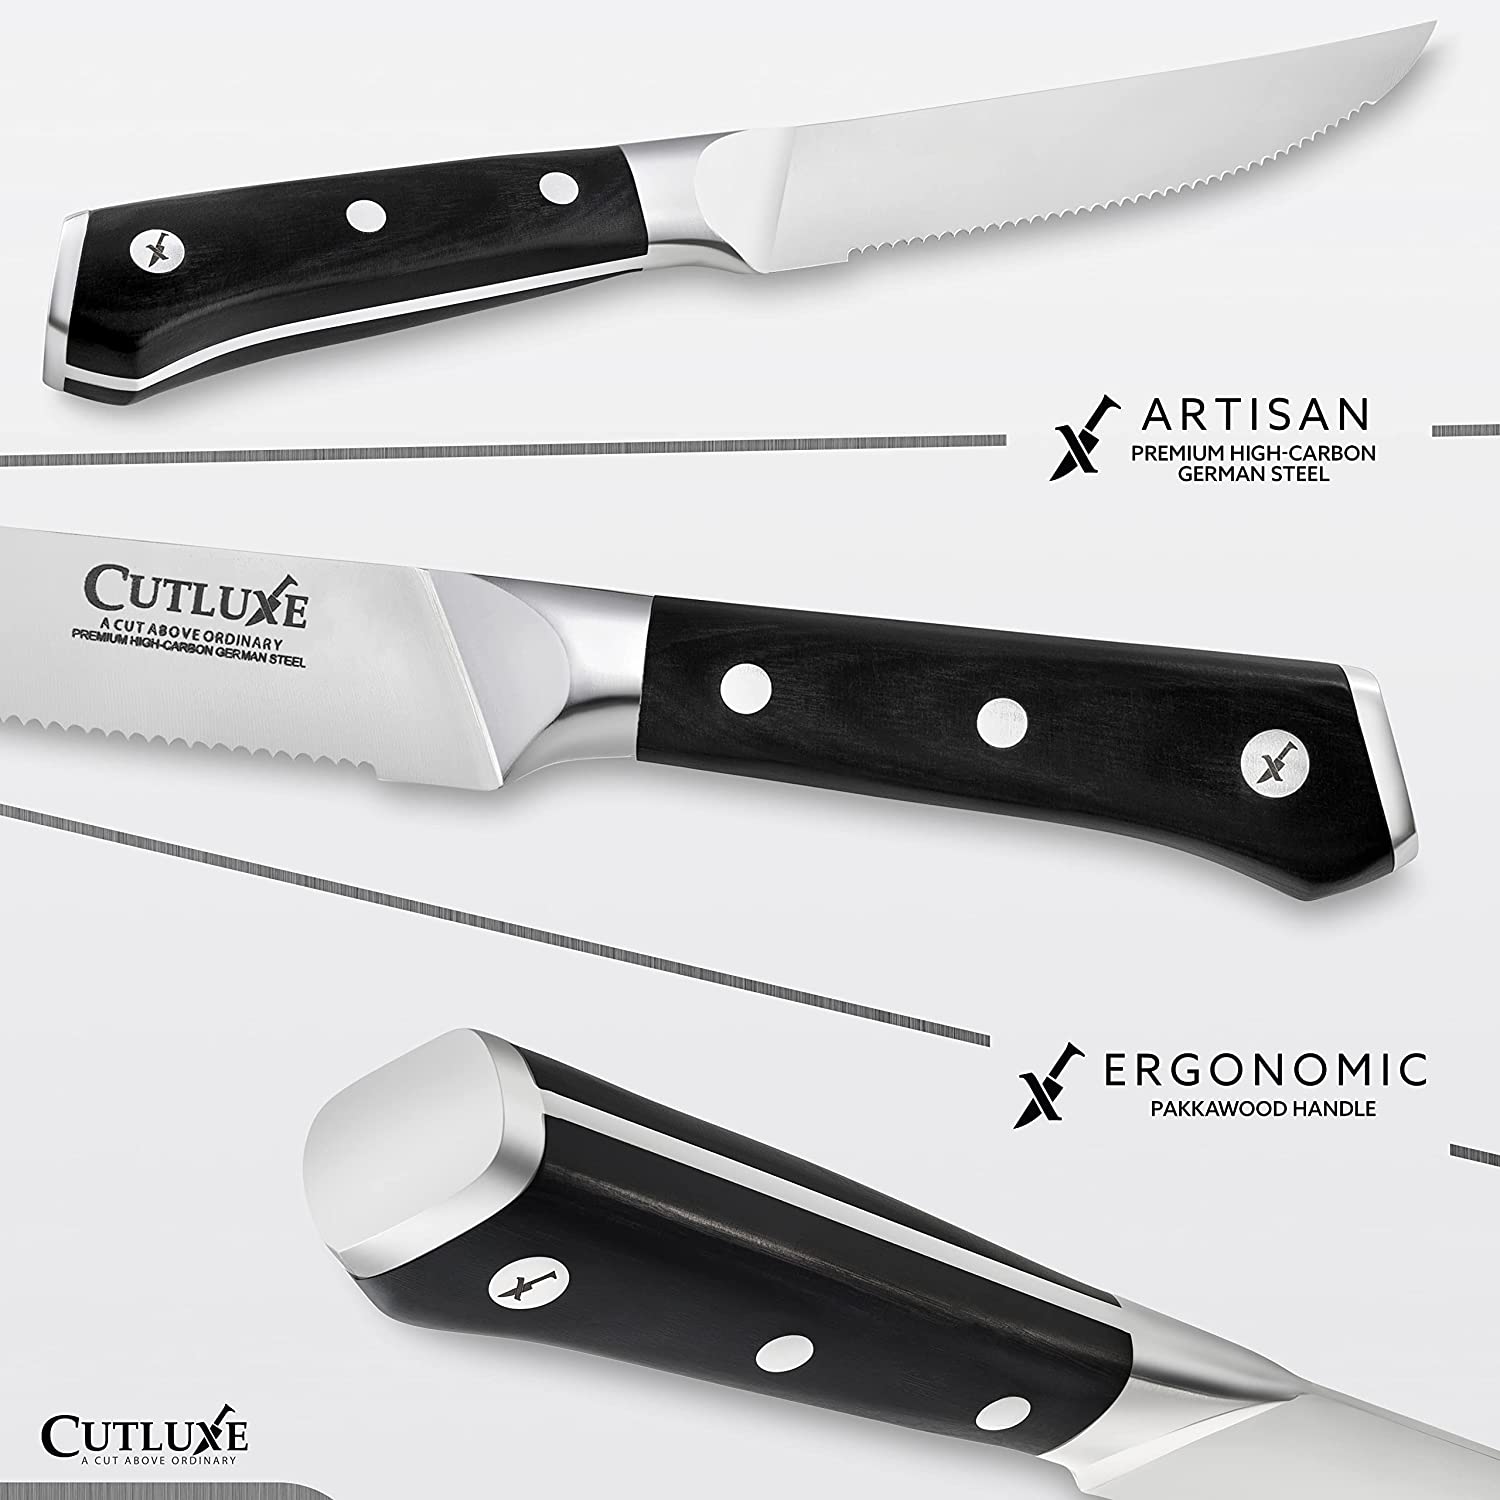 Serrated Vs Non Serrated Steak Knives: Main Differences – Cutluxe